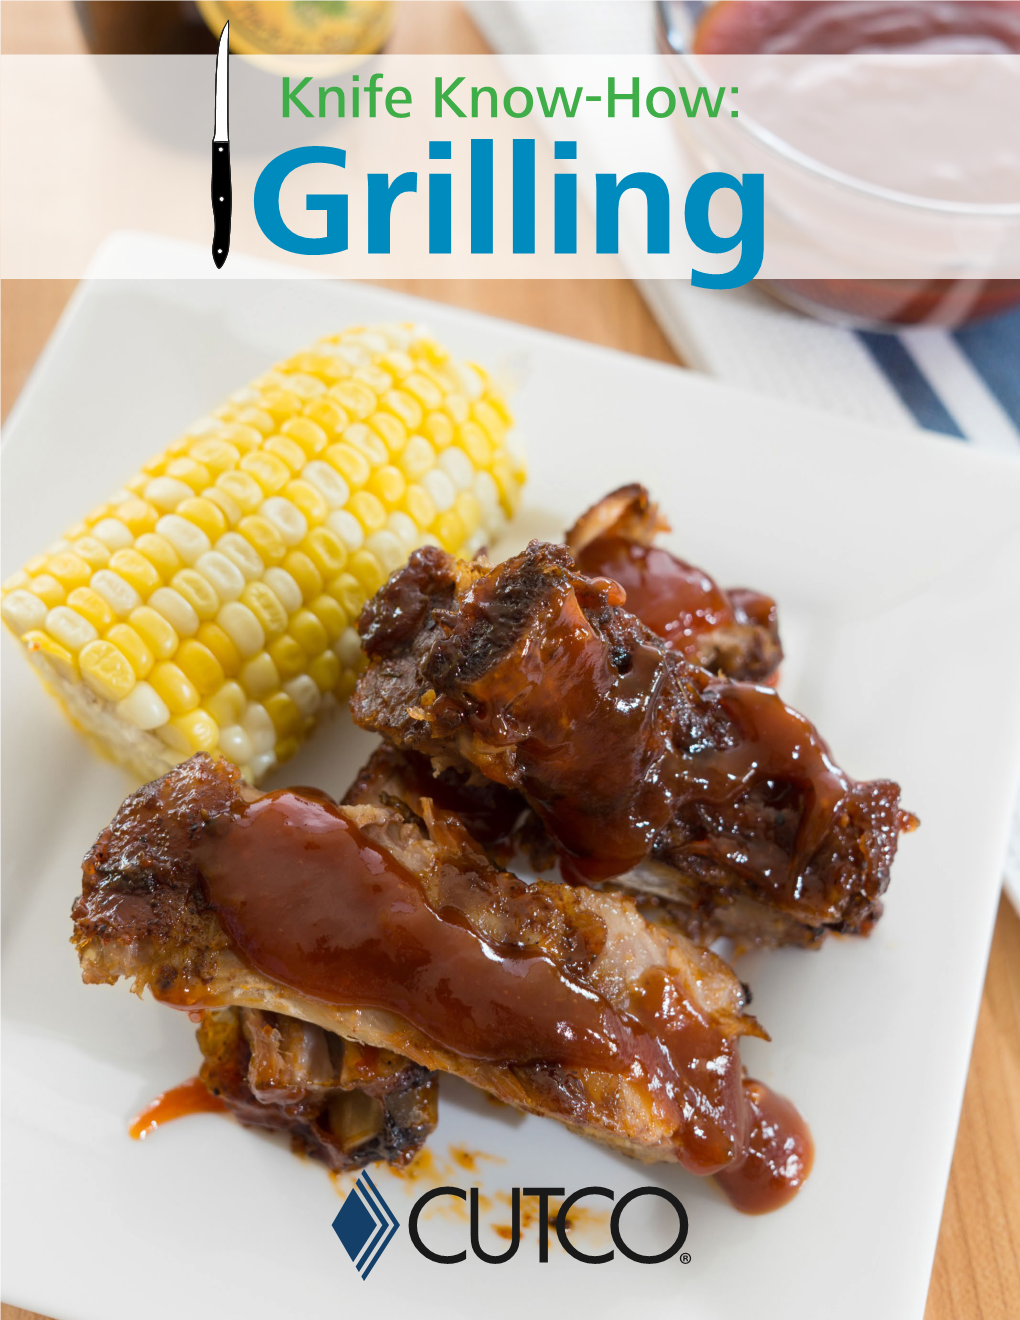 Knife Know-How: Grilling Contents